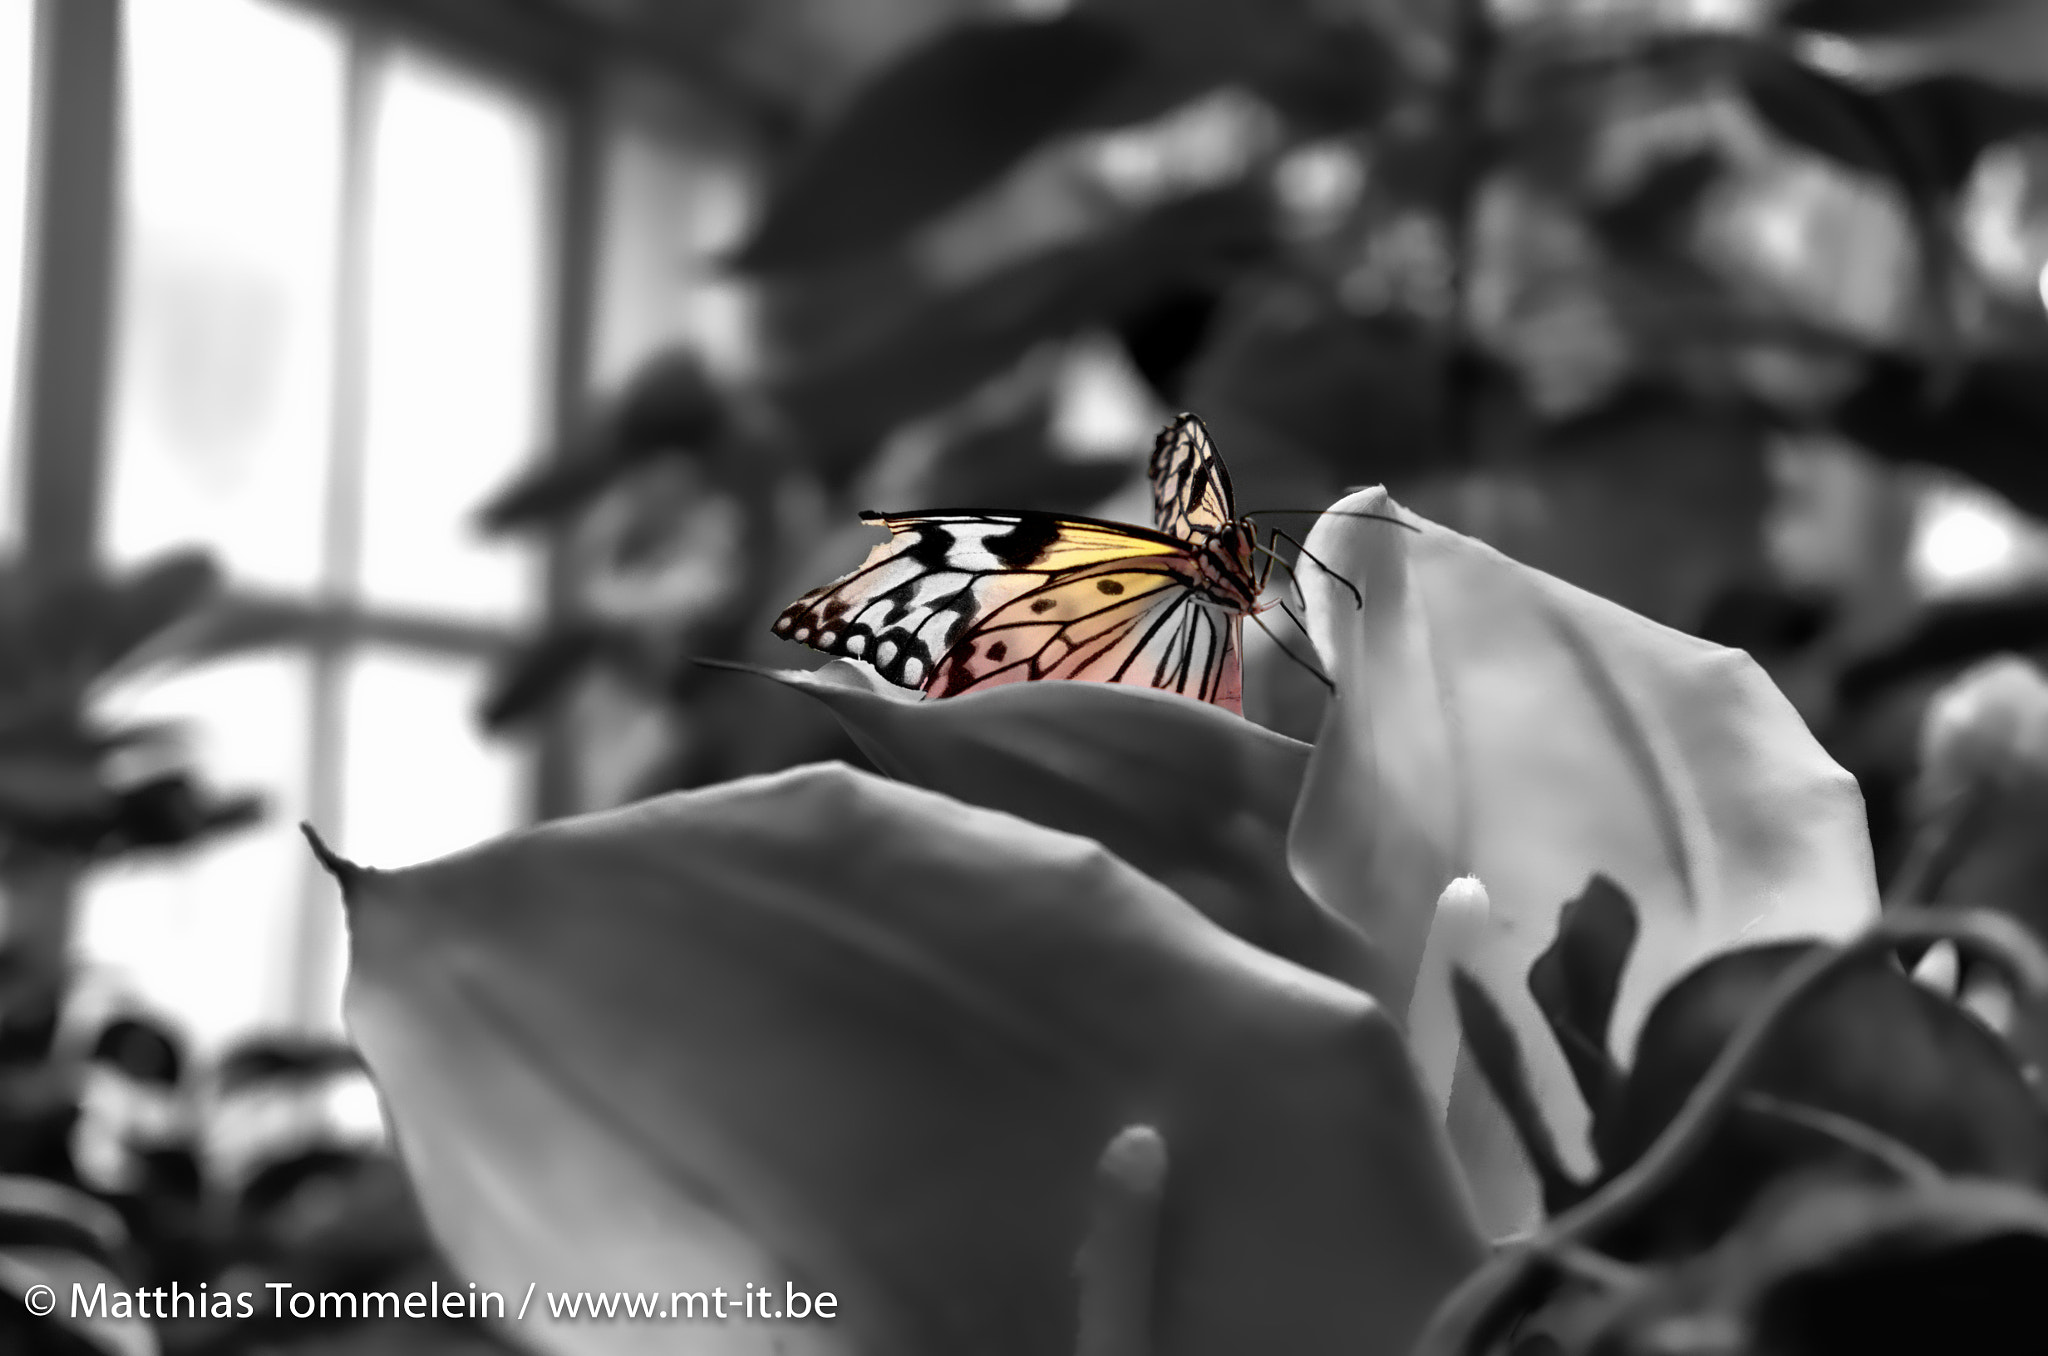 Vario-Elmar T 1:3.5-5.6 / 18-56 ASPH. sample photo. Butterfly in the butterfly garden photography